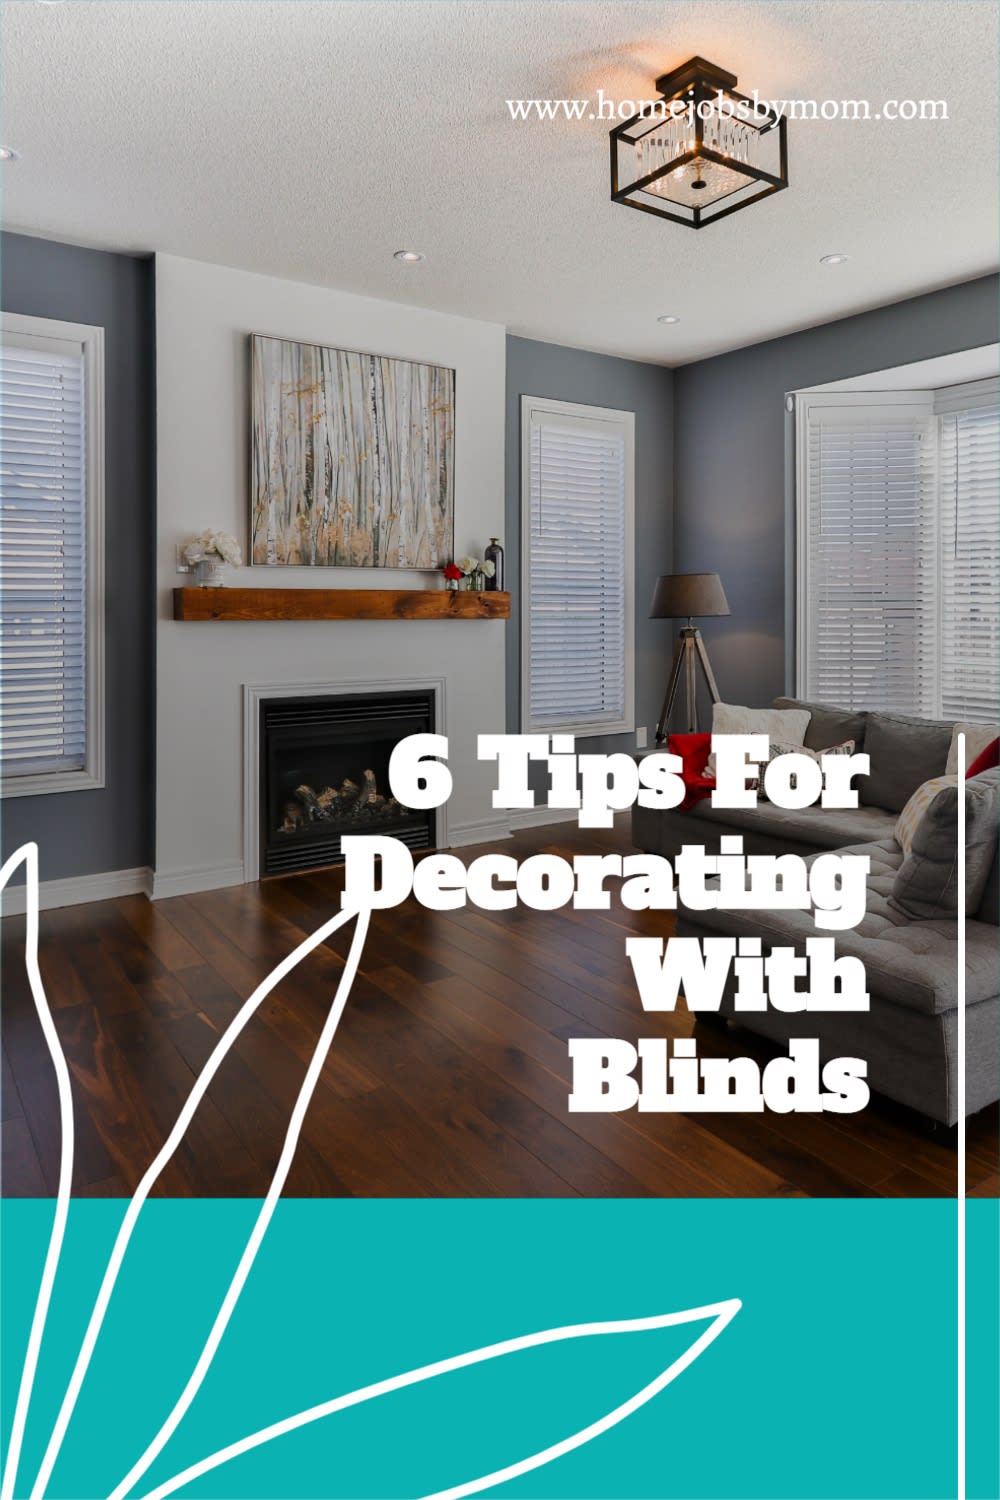 6 Tips For Decorating With Blinds